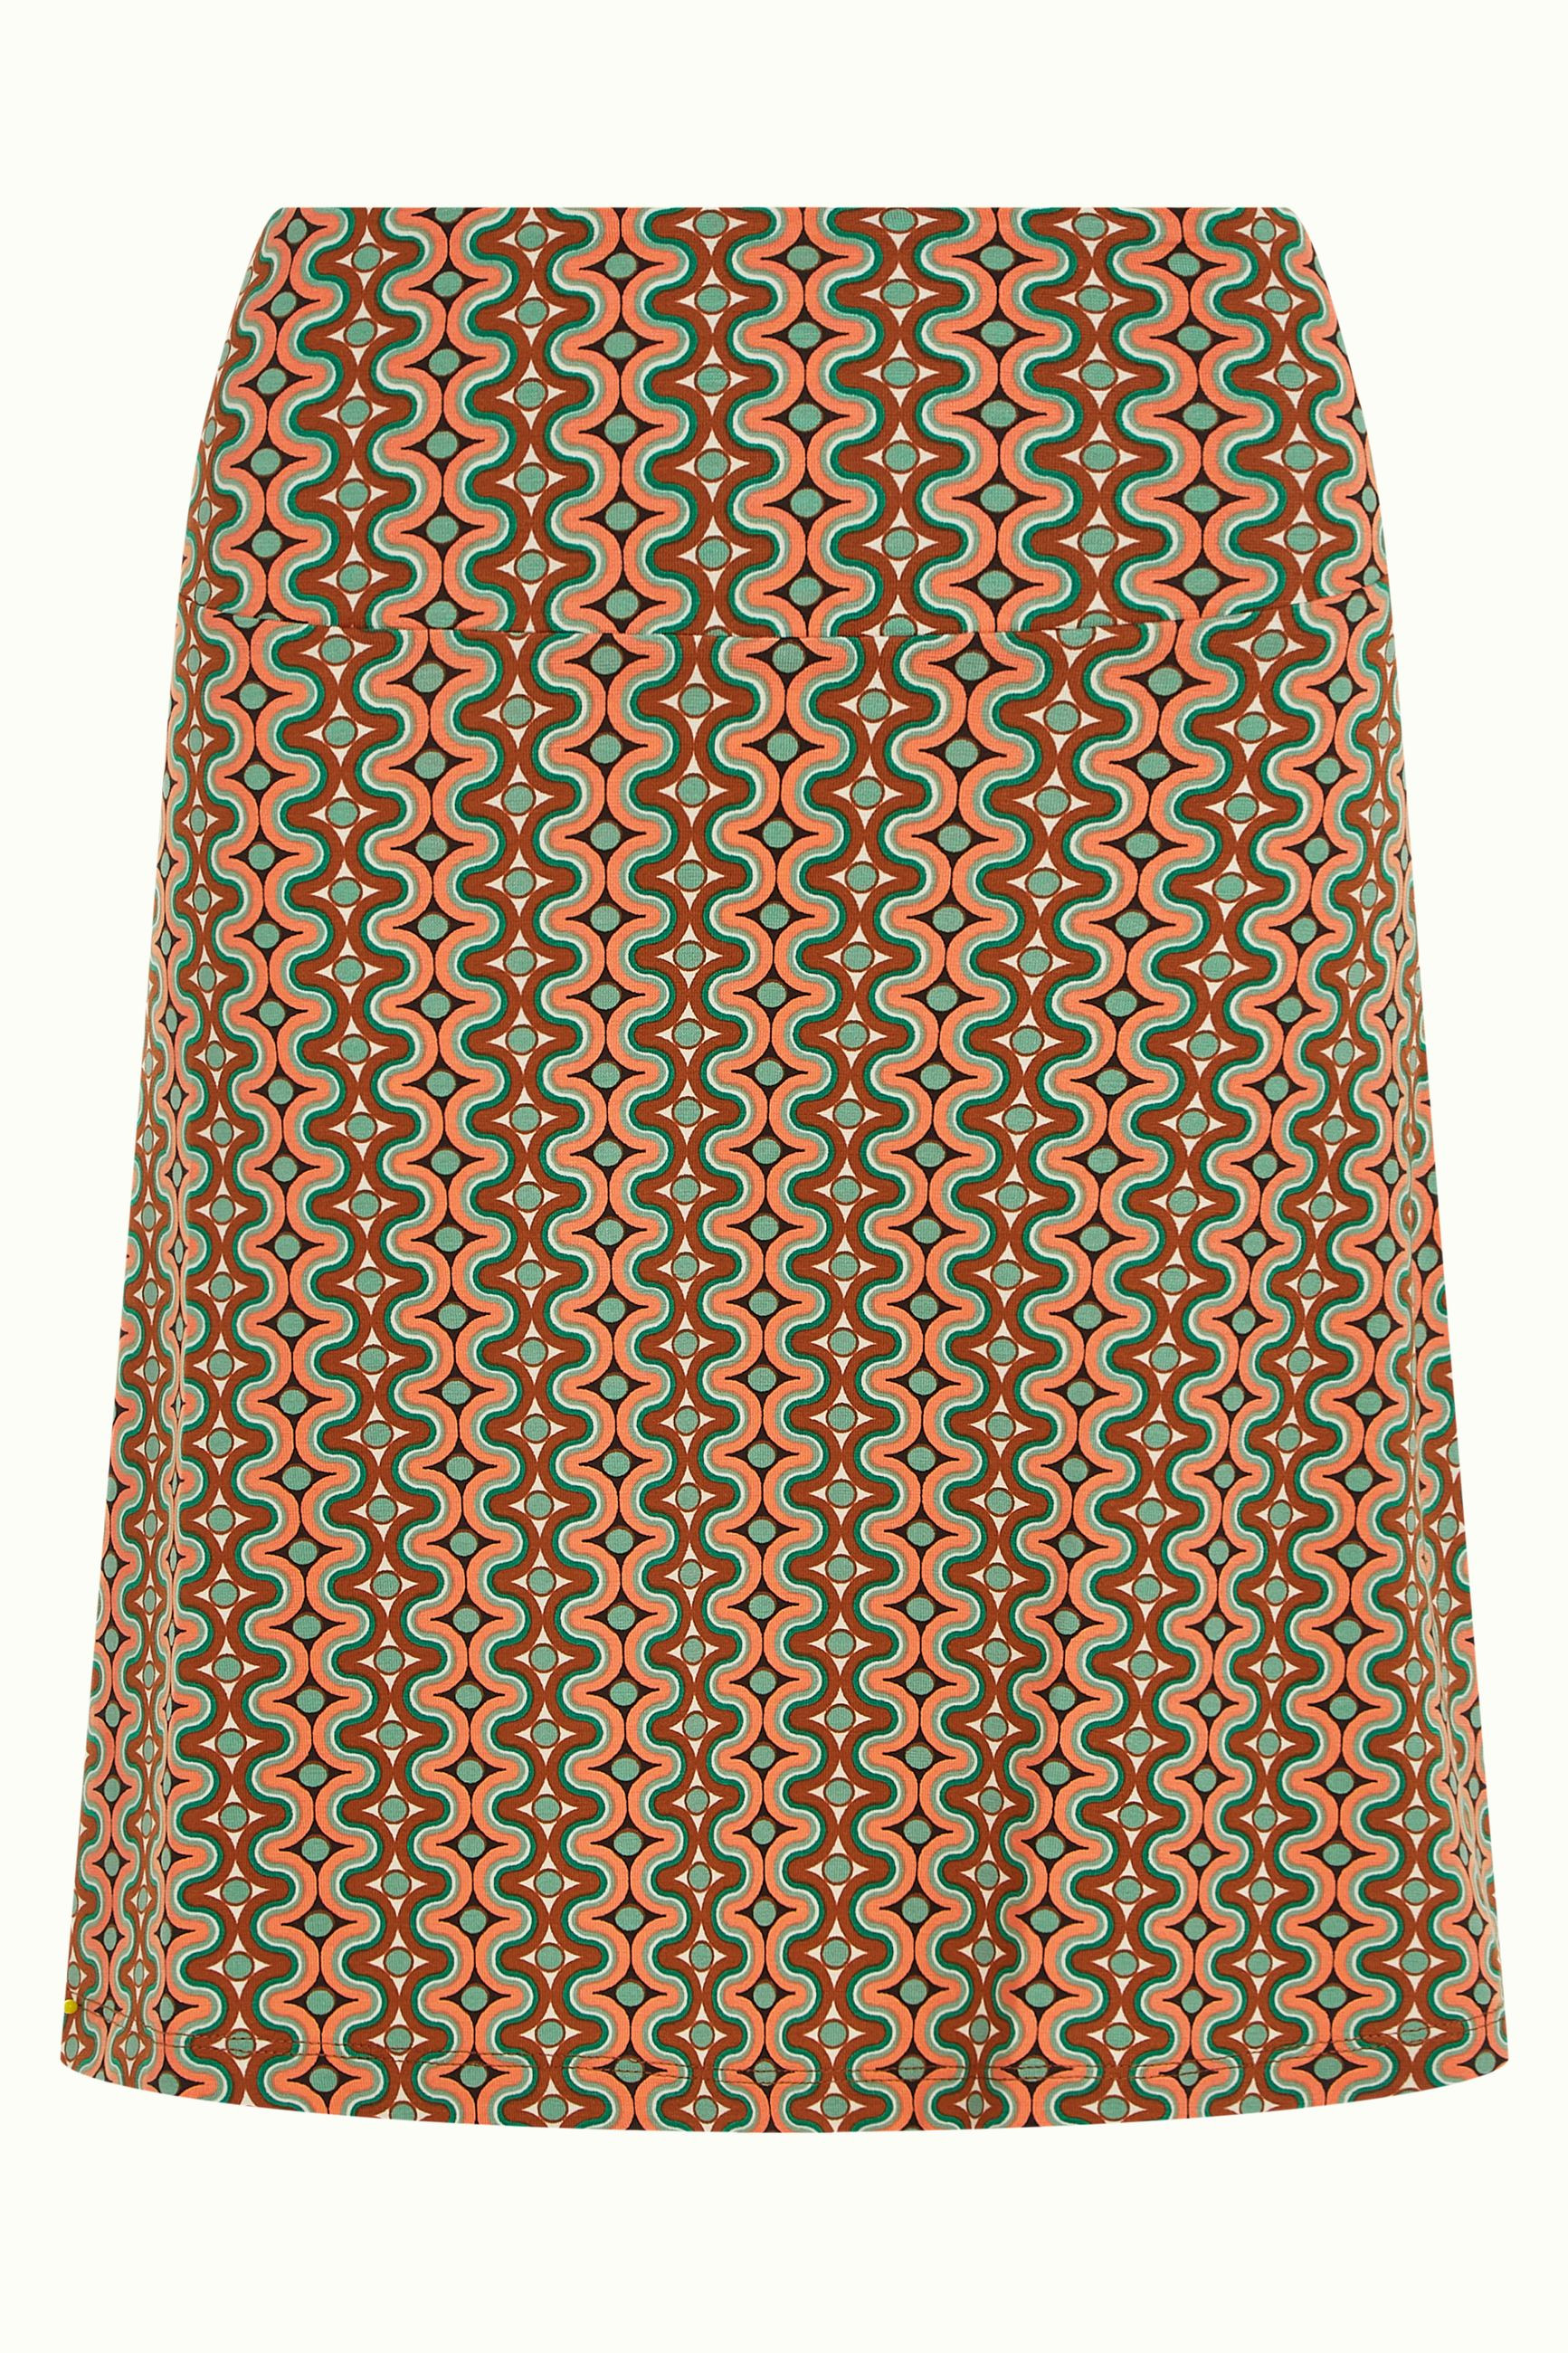 King Louie Border Skirt Twisted, Farbe: Black, Rock